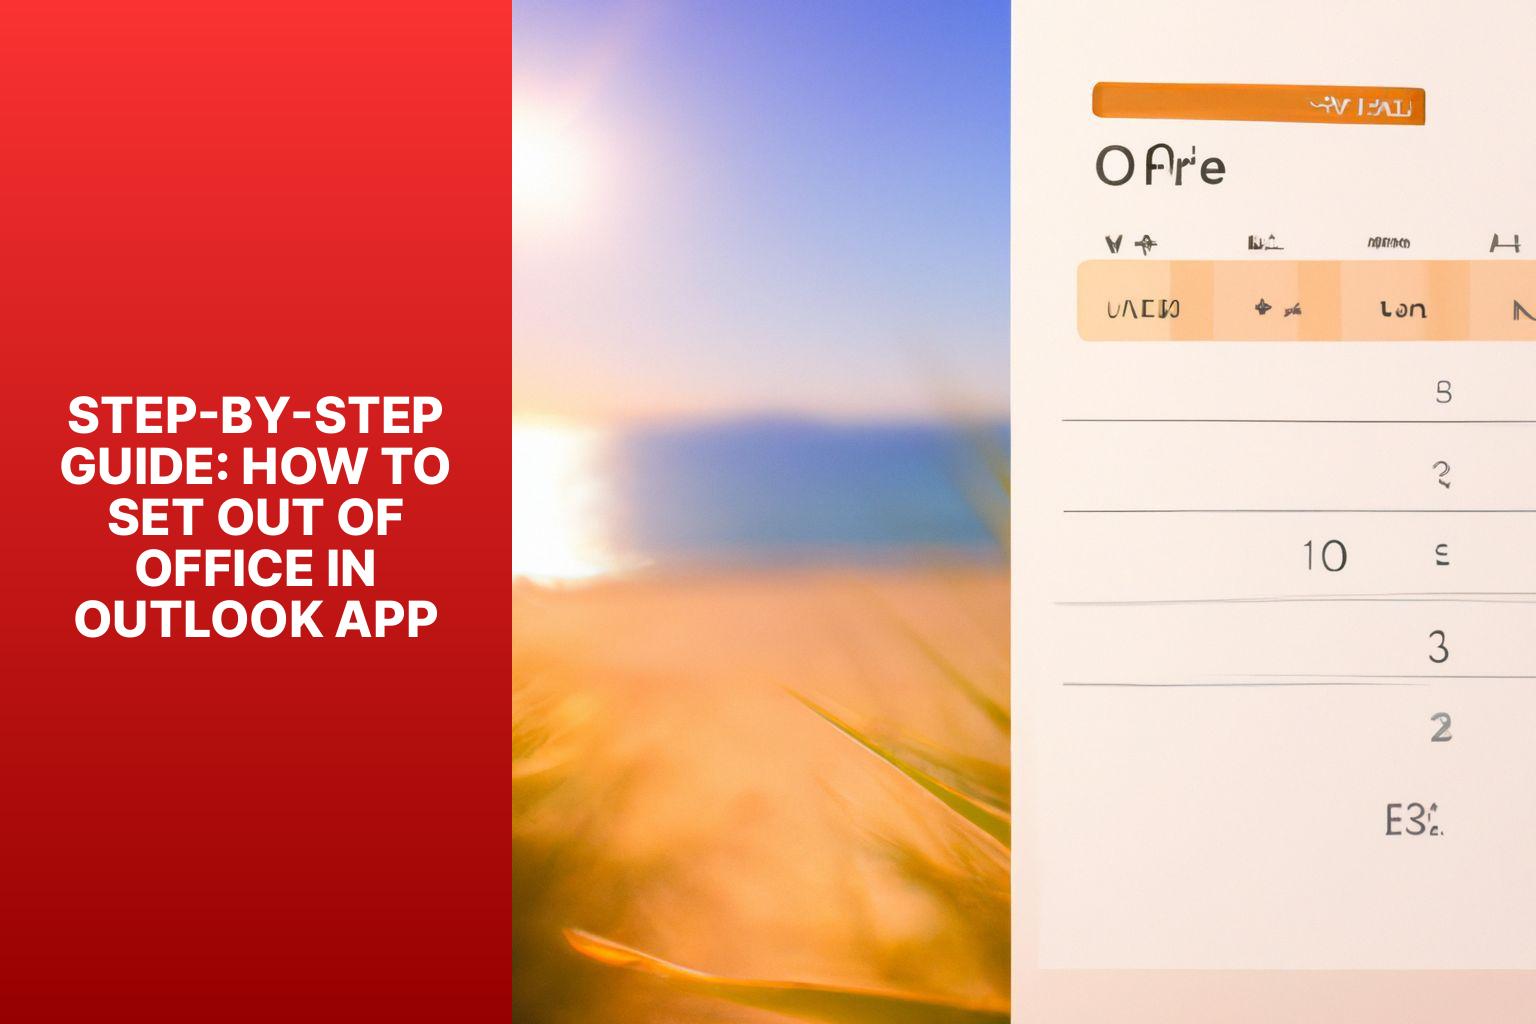 Step-by-Step Guide: How to Set Out of Office in Outlook App - how to set out of office in outlook app 